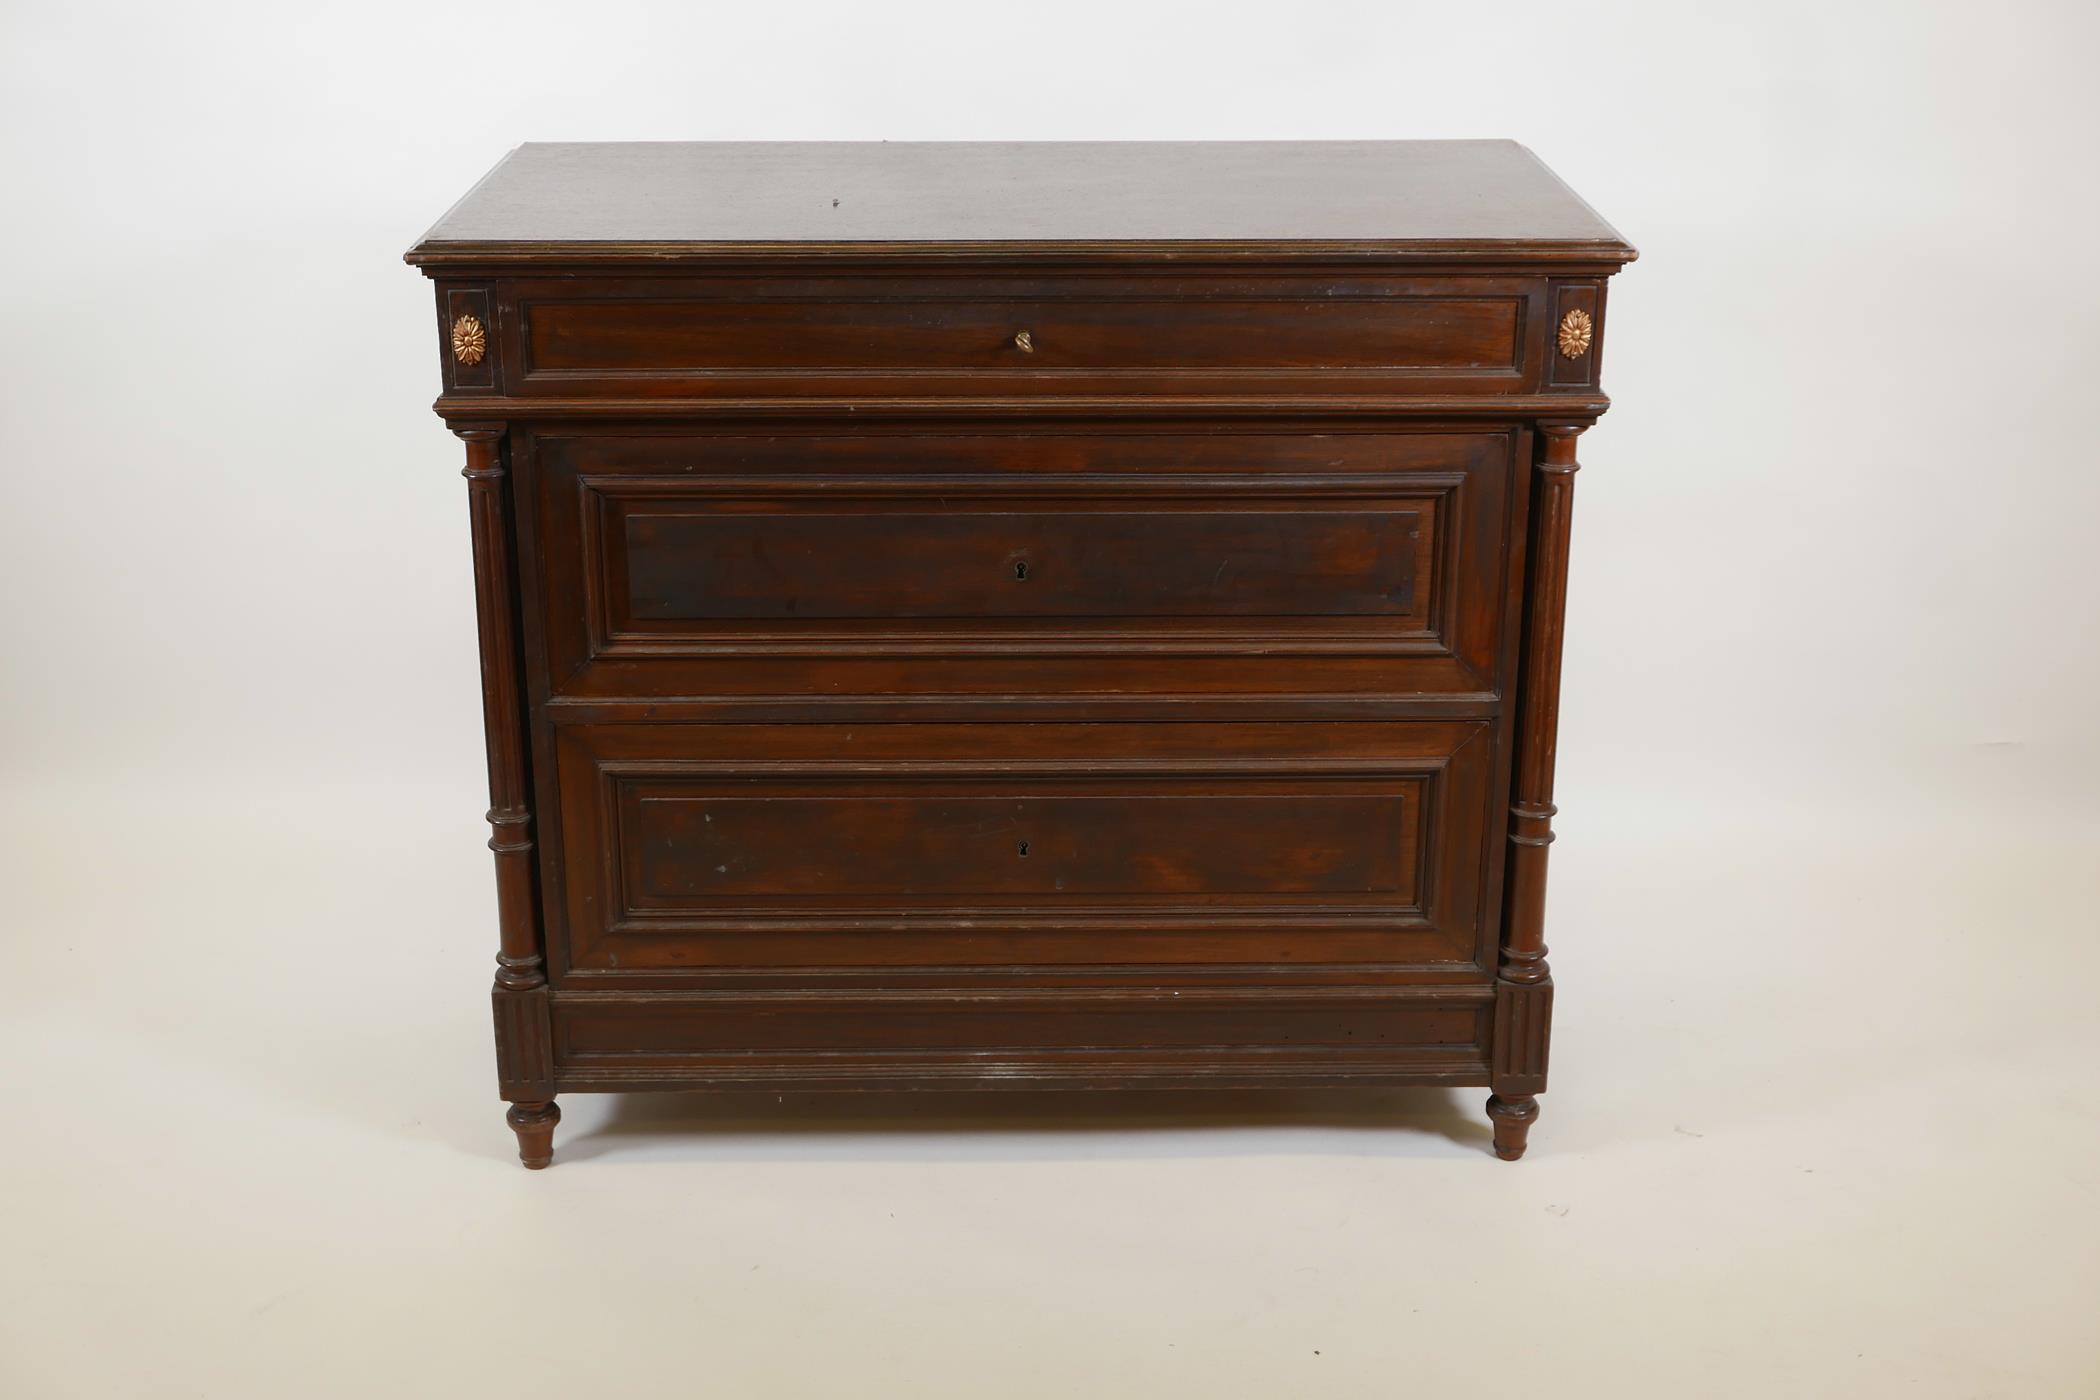 A C19th French mahogany commode with three moulded front drawers flanked by fluted columns, raised